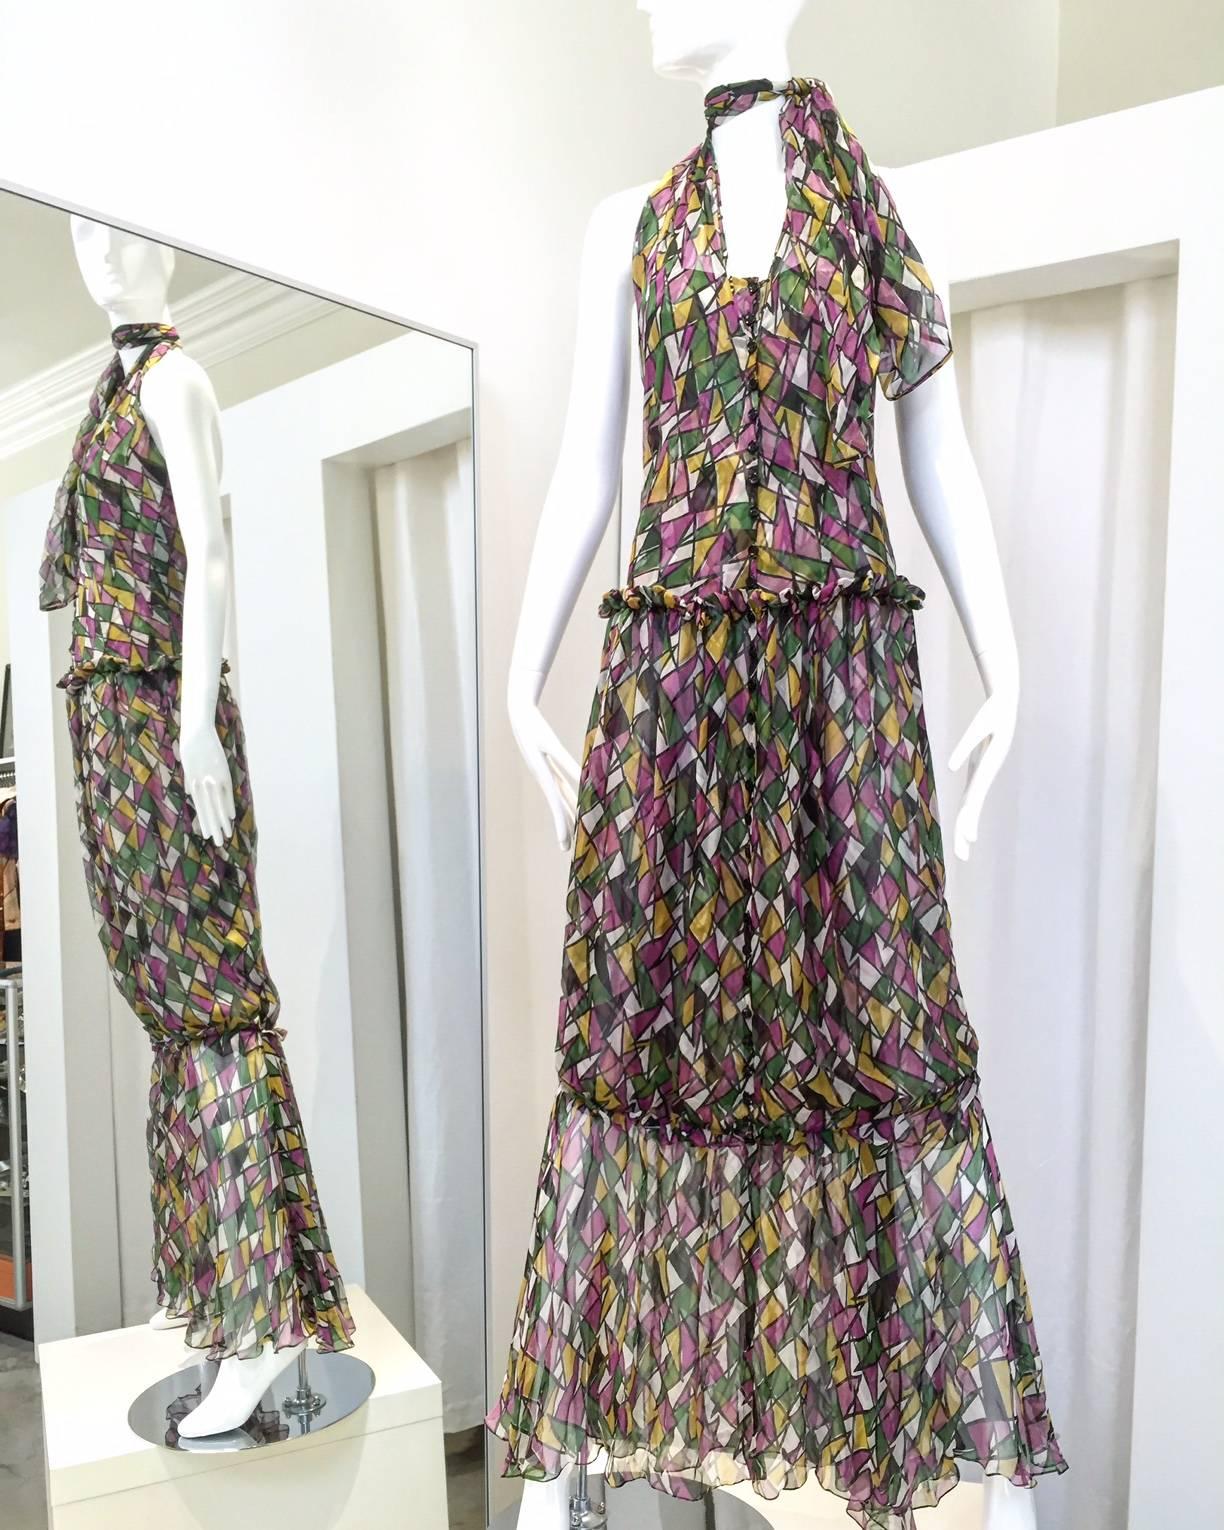 Vintage Yves Saint Laurent by Tom Ford multi color print( purple, green, yellow and white) diamond shape silk halter cocktail dress. Corset bodice and layered by silk sash that ties as halter. 
dress. size: 2 . XS to Small
Bust: 32